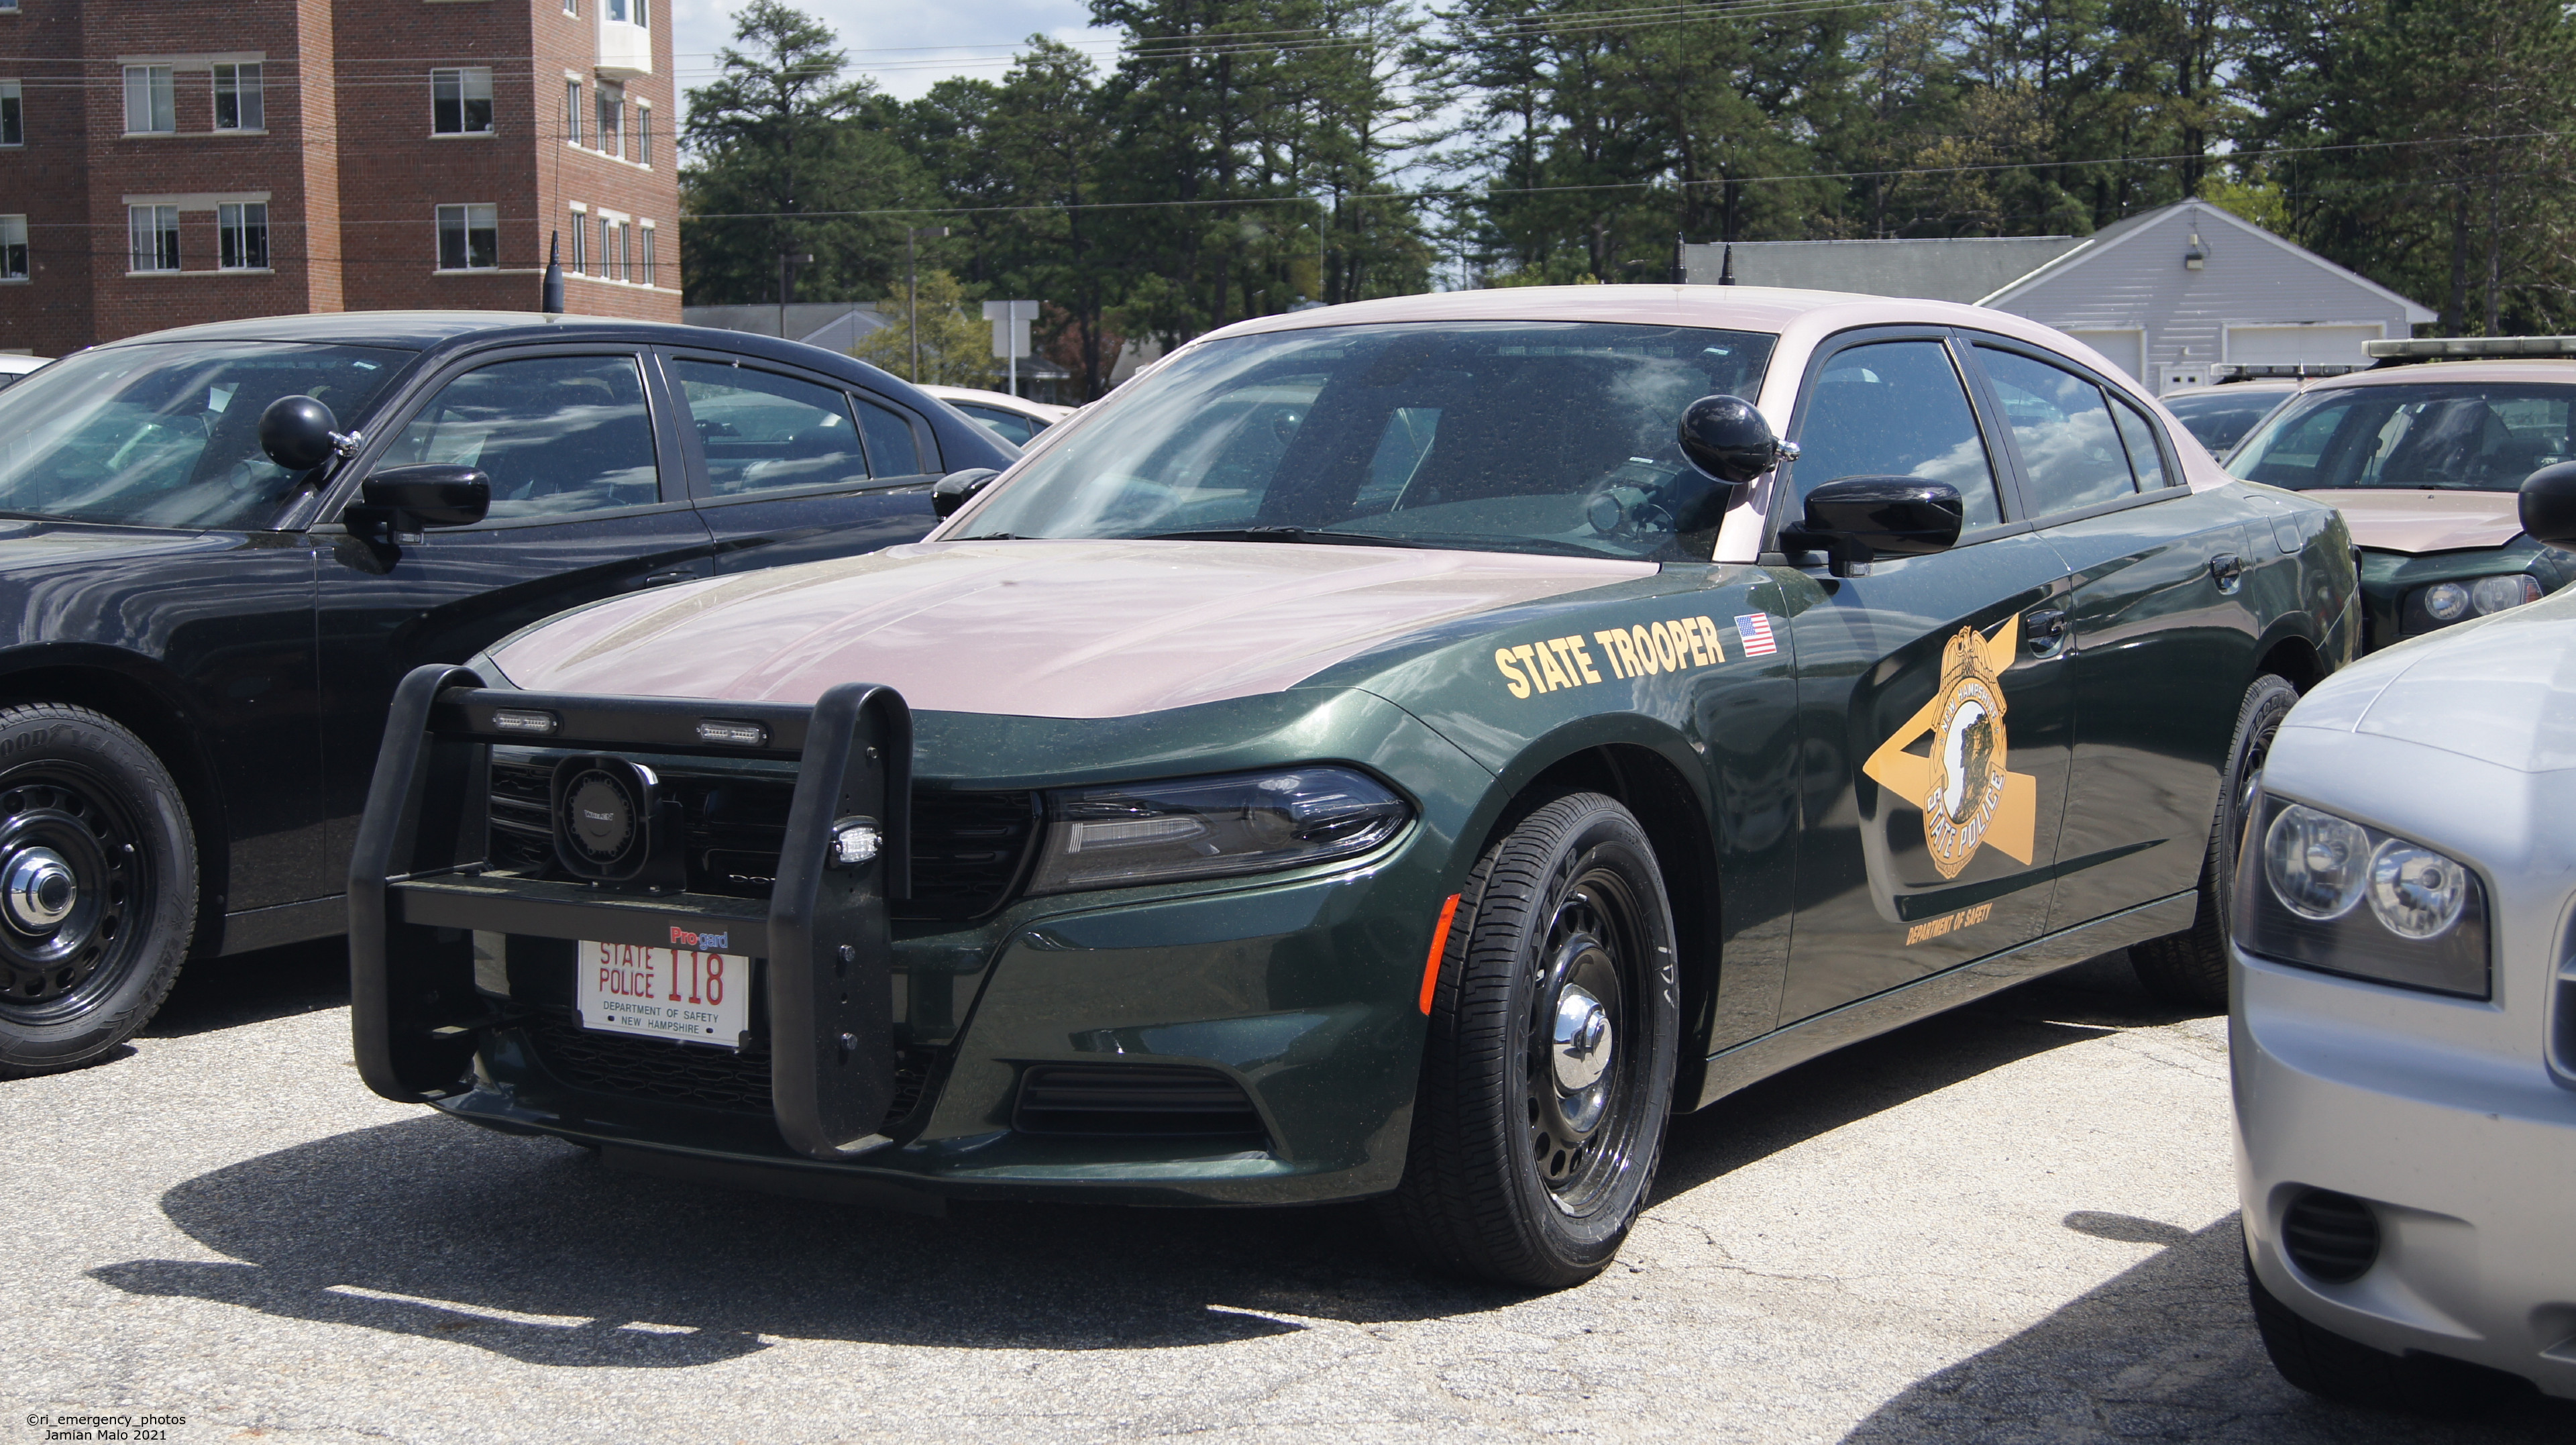 A photo  of New Hampshire State Police
            Cruiser 118, a 2020 Dodge Charger             taken by Jamian Malo